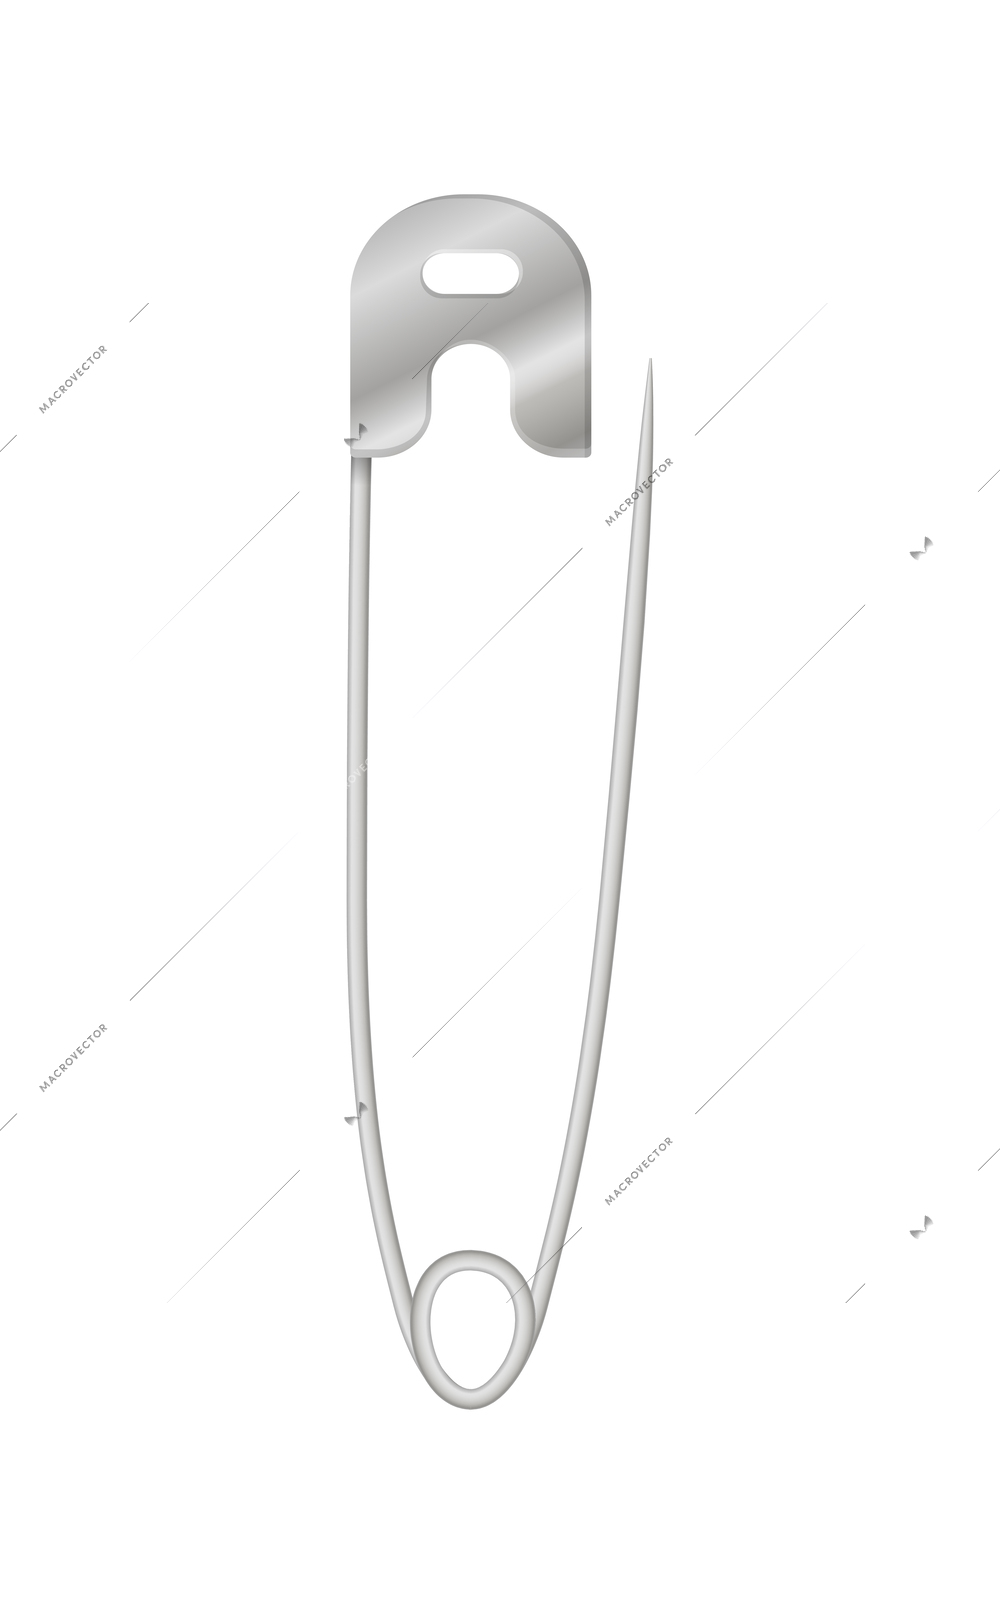 Realistic open metal safety pin vector illustration